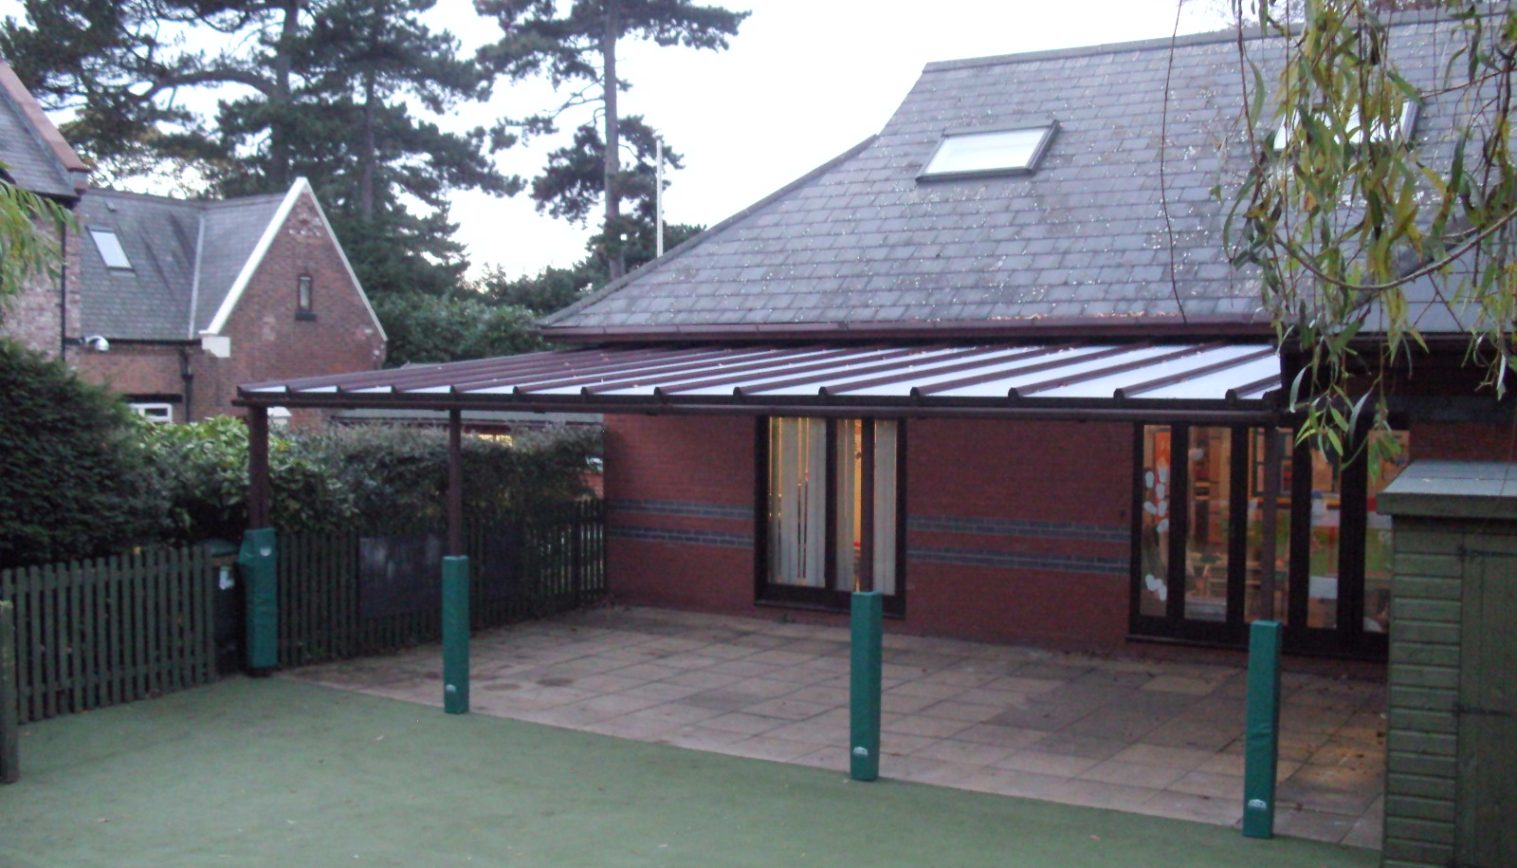 The Firs School – Wall Mounted Canopy